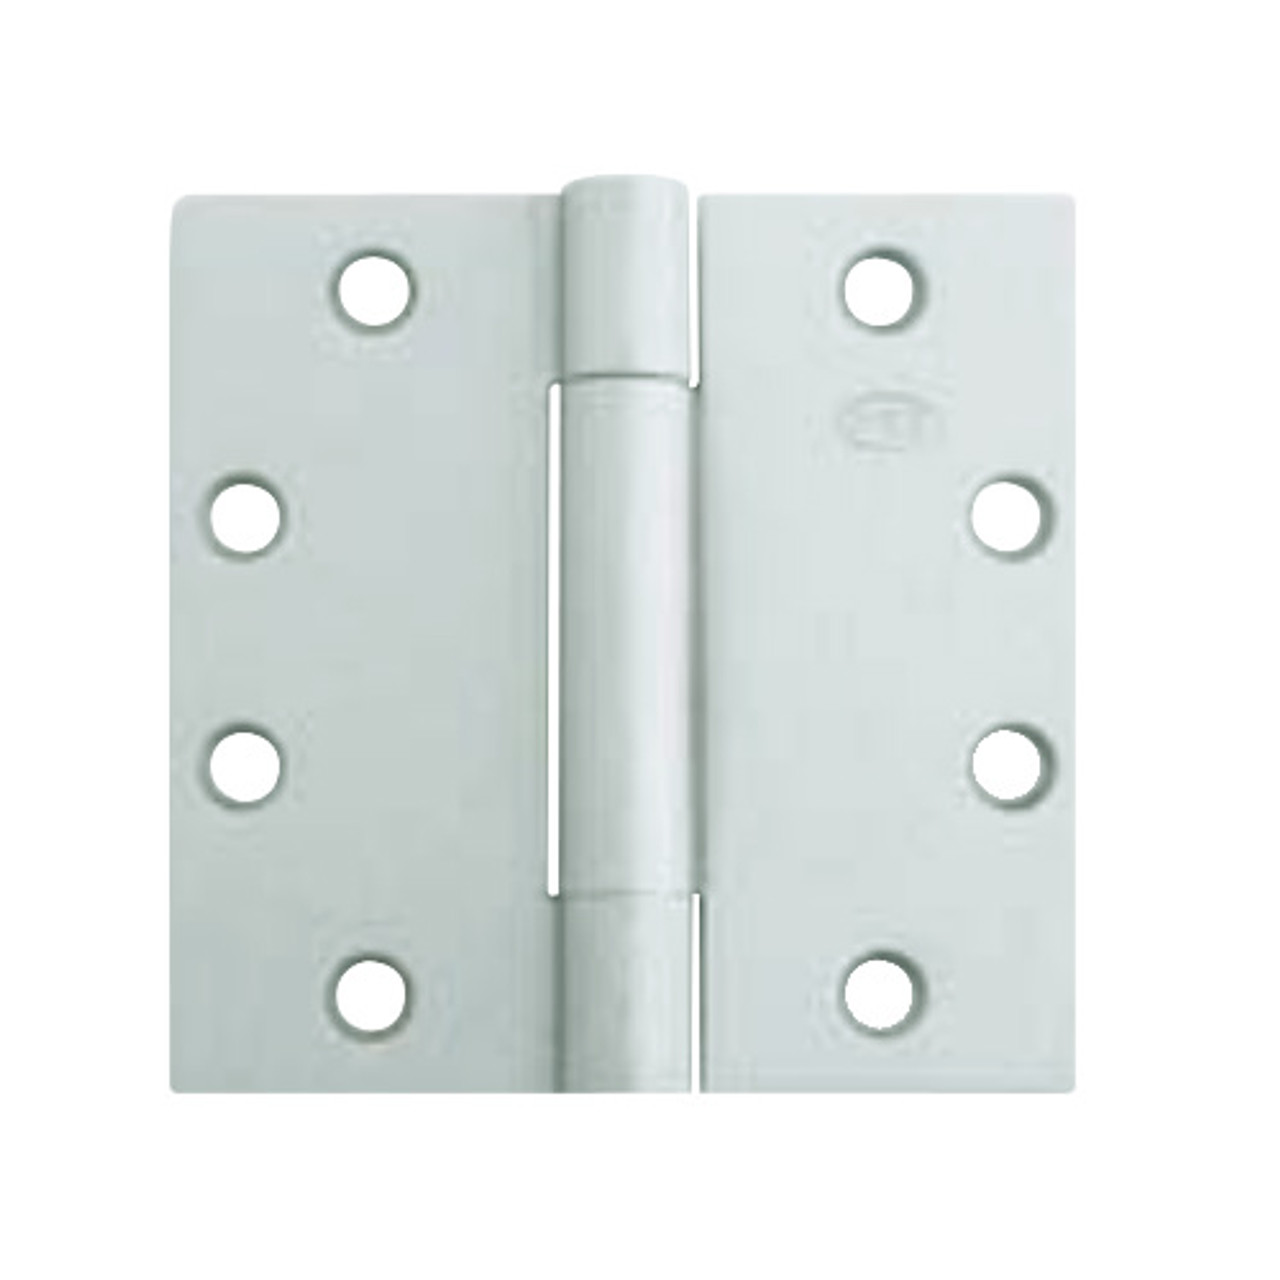 3CB1-3-5x3-5-646 IVES 3 Knuckle Concealed Bearing Full Mortise Hinge in Satin Nickel Plated